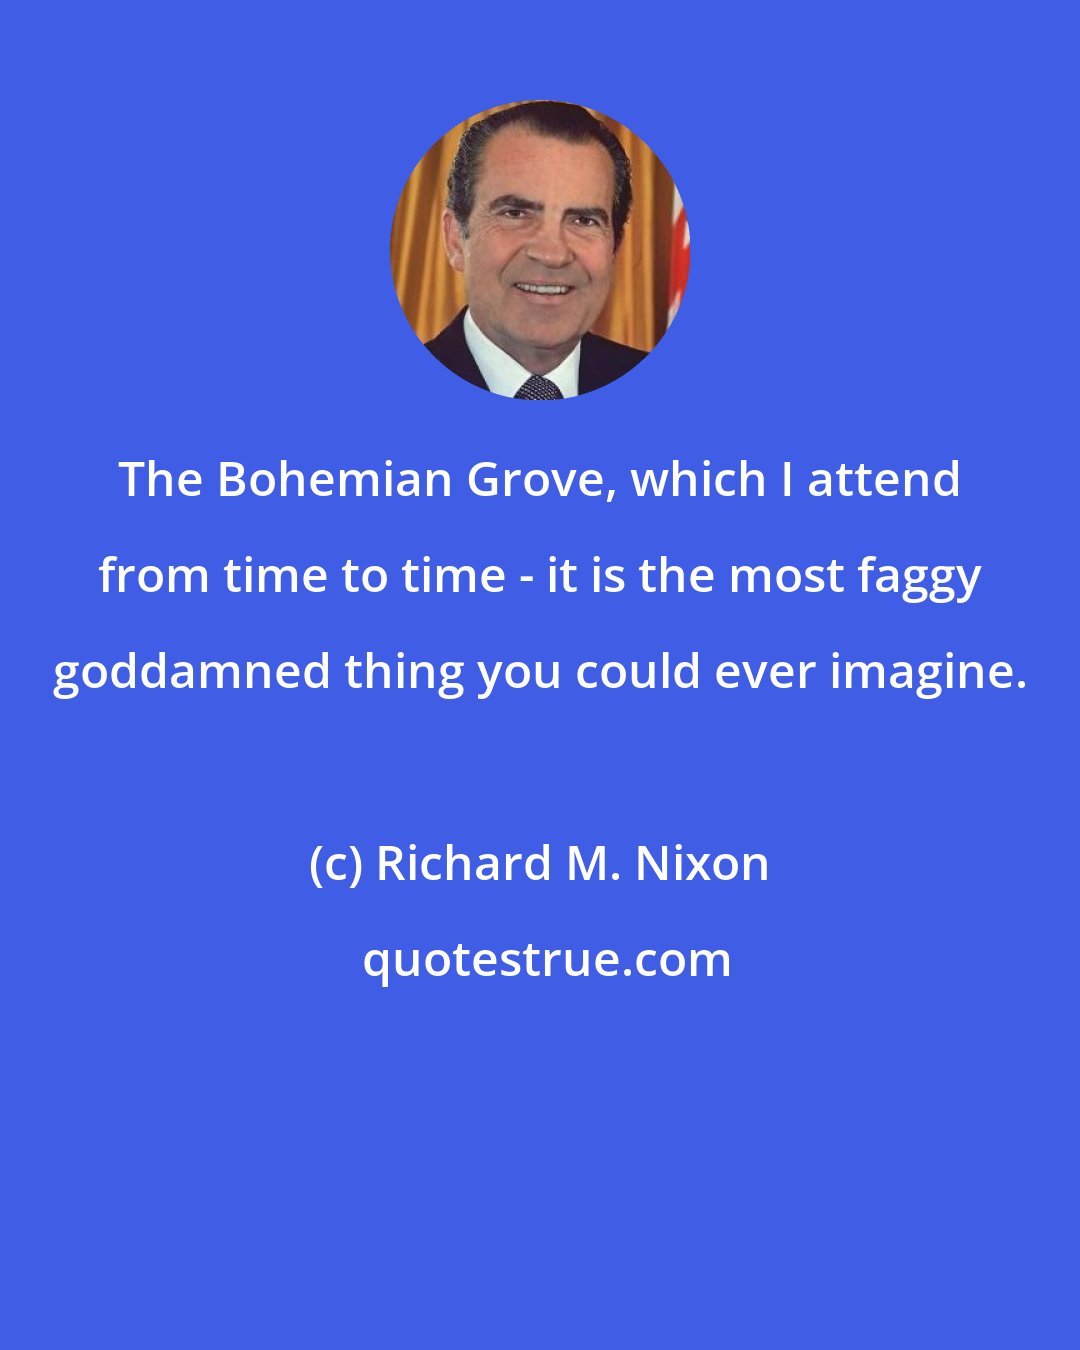 Richard M. Nixon: The Bohemian Grove, which I attend from time to time - it is the most faggy goddamned thing you could ever imagine.